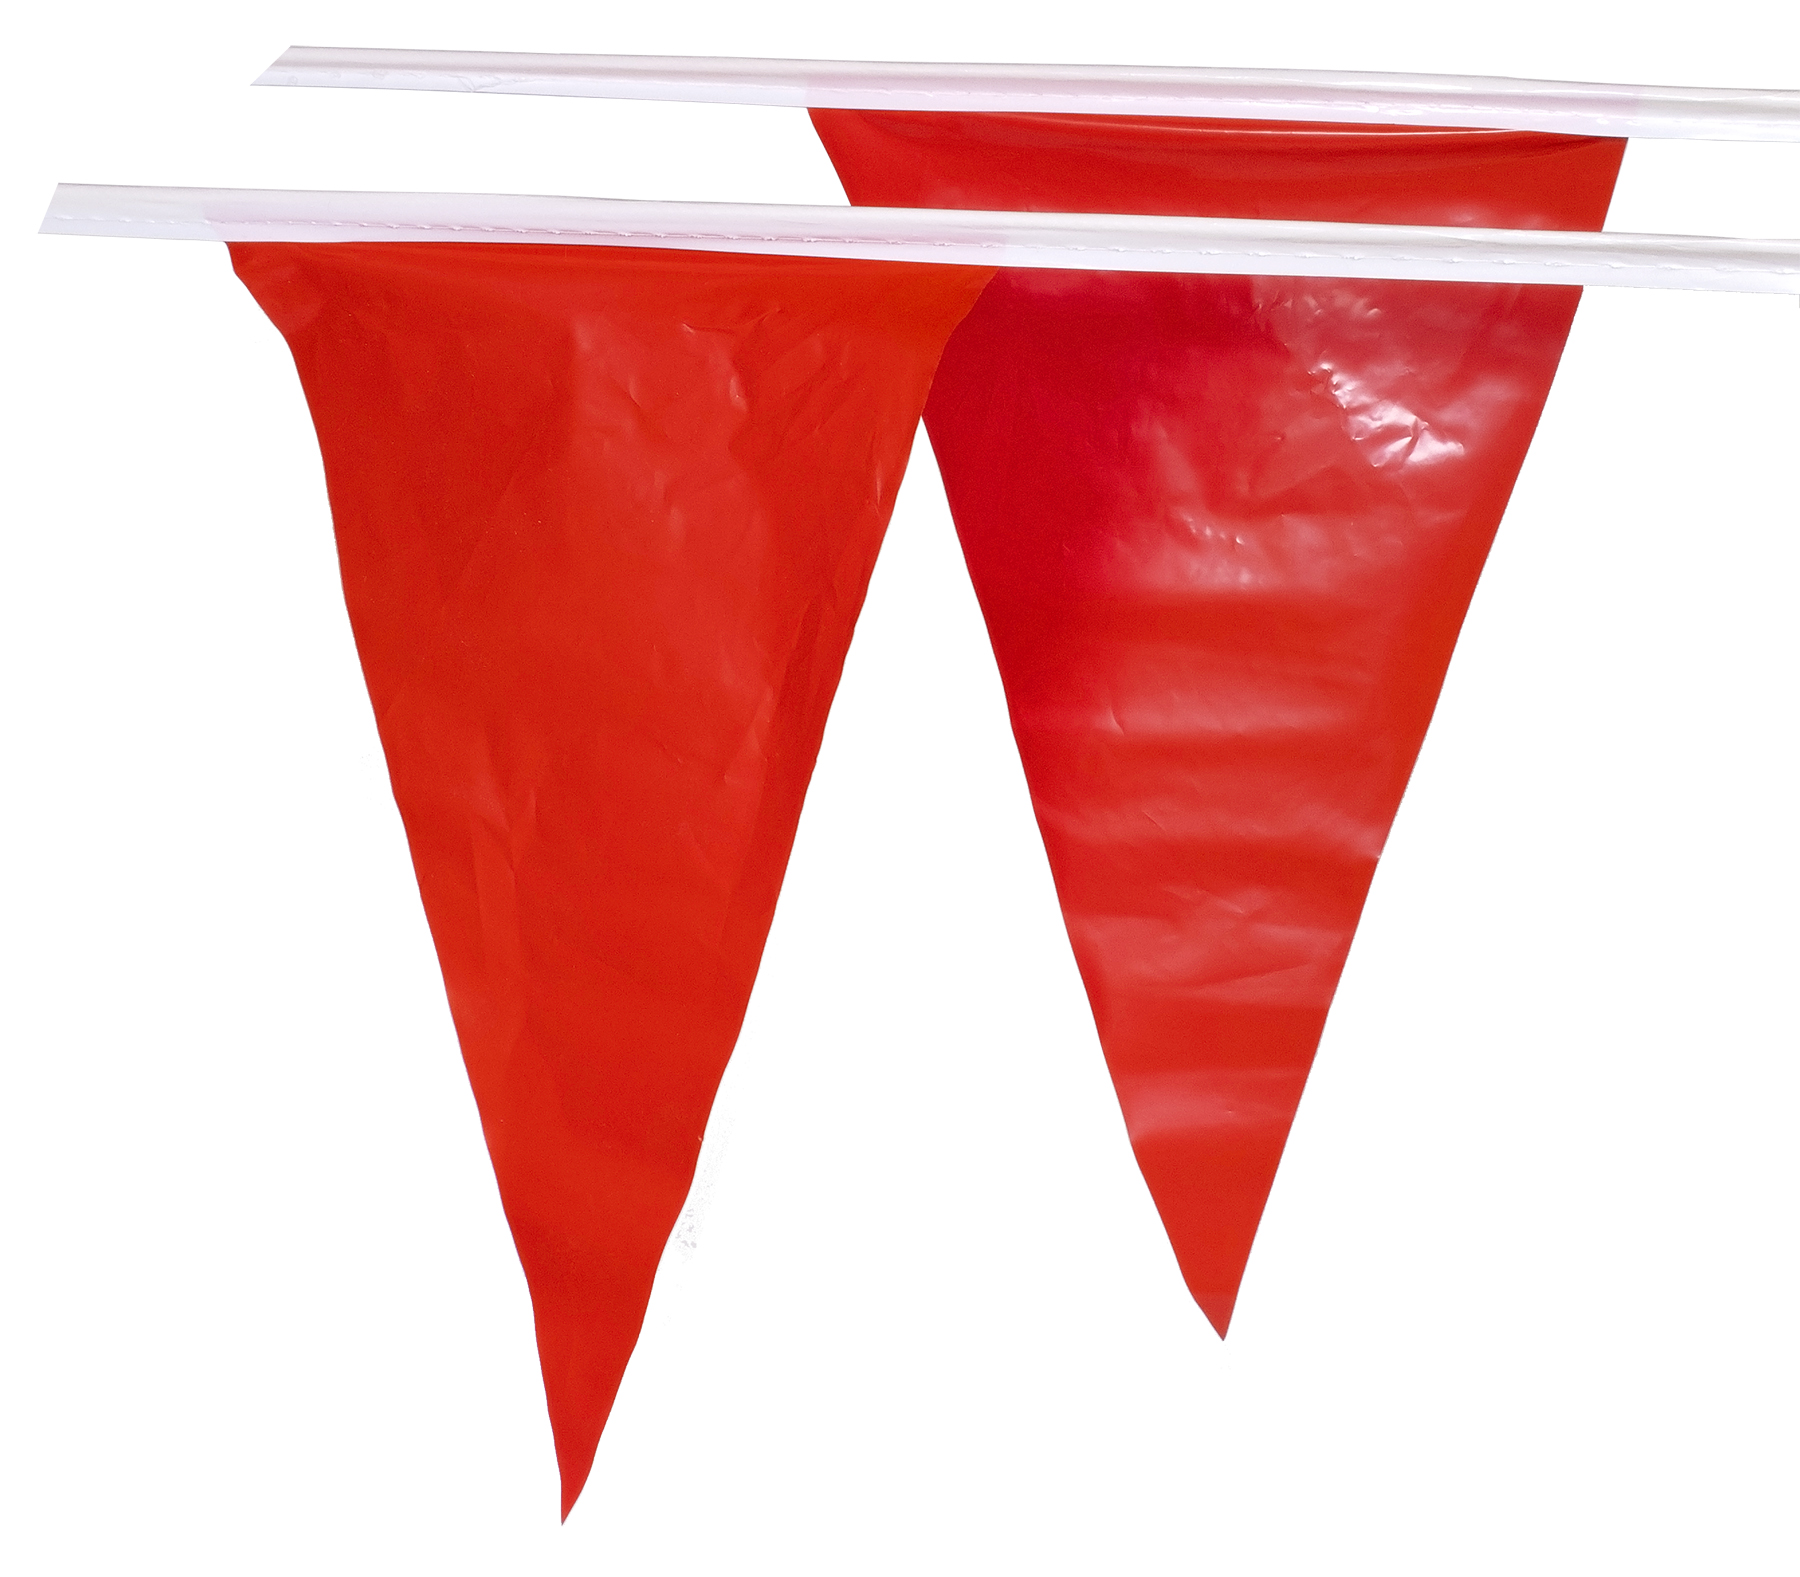 The Brushman, 100 ft. OSHA Pennant Flags (Red)